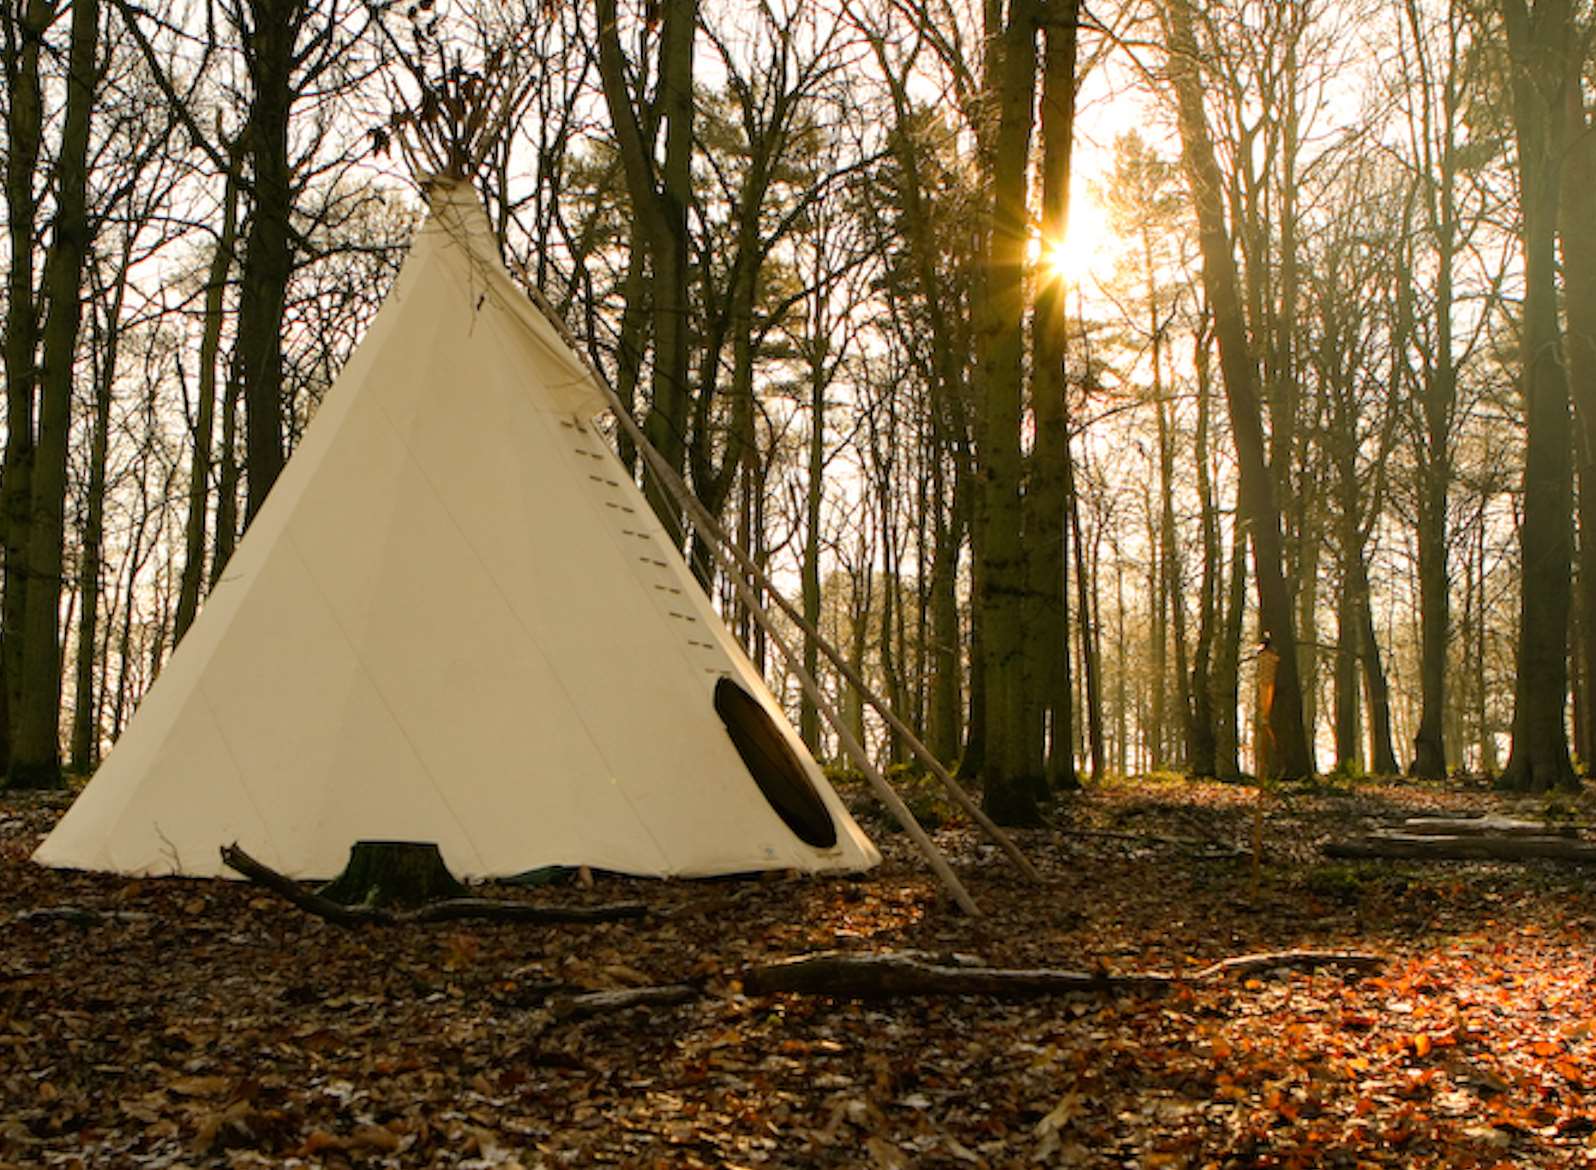 Camp Wilderness at Penshurst PLace